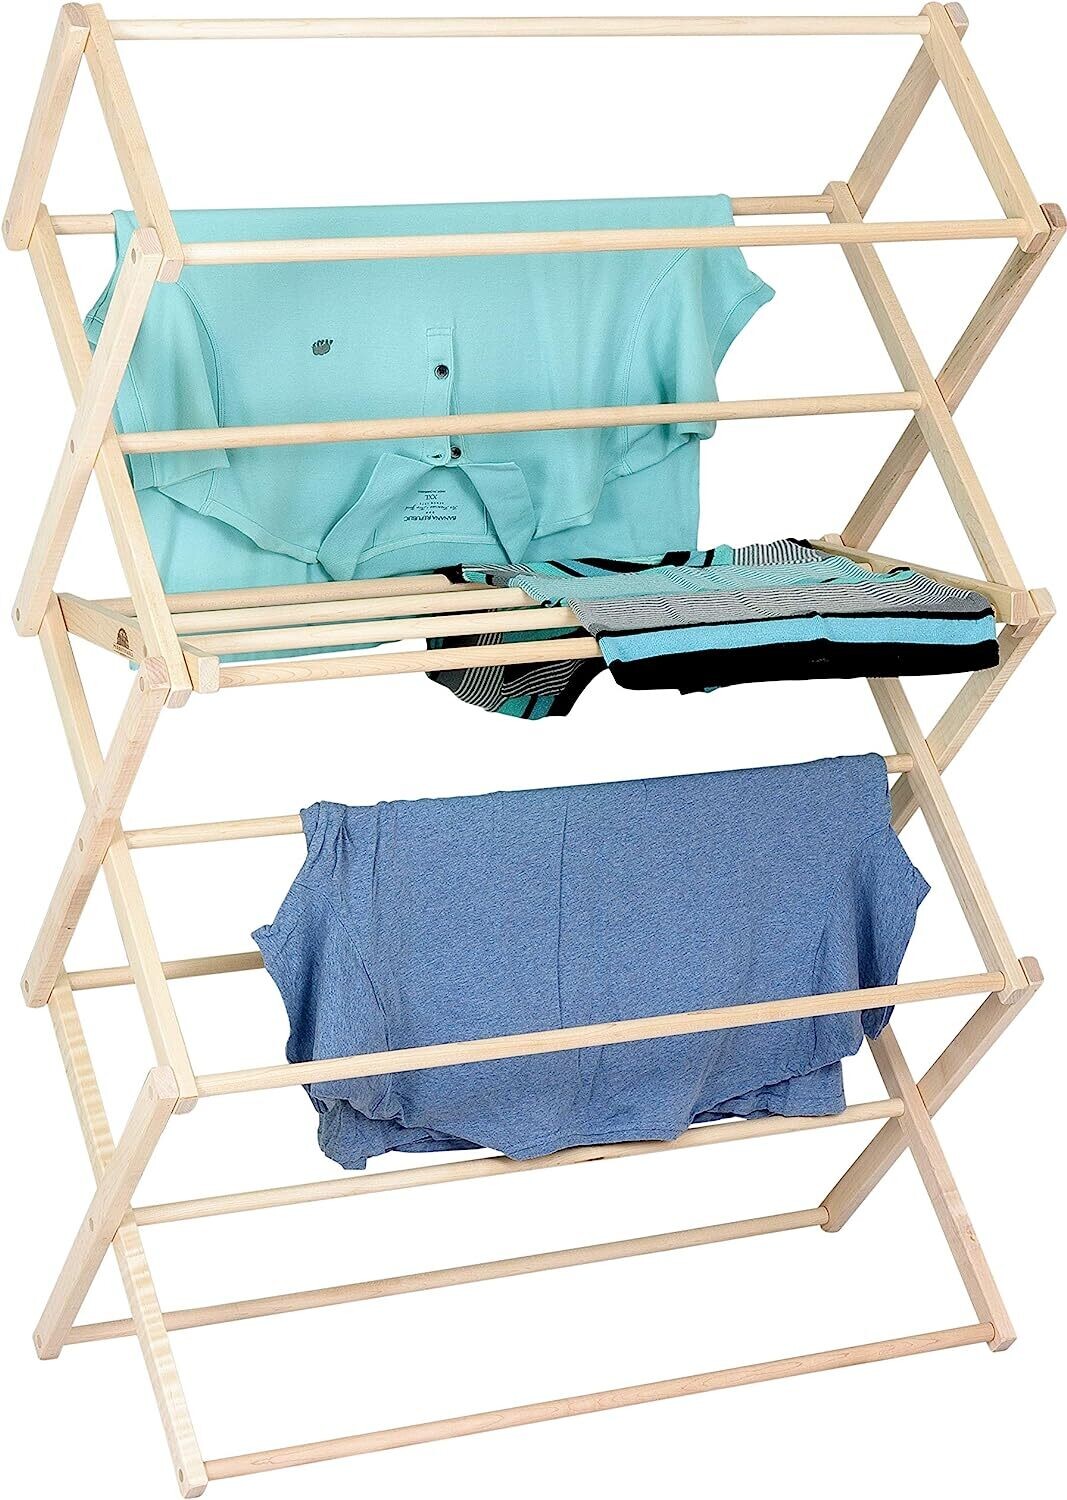 Sarkar Foldable Wooden Clothes Drying Rack Size CDS-MINI 7 Pipes Portable &amp; collapsible CDS-MINI